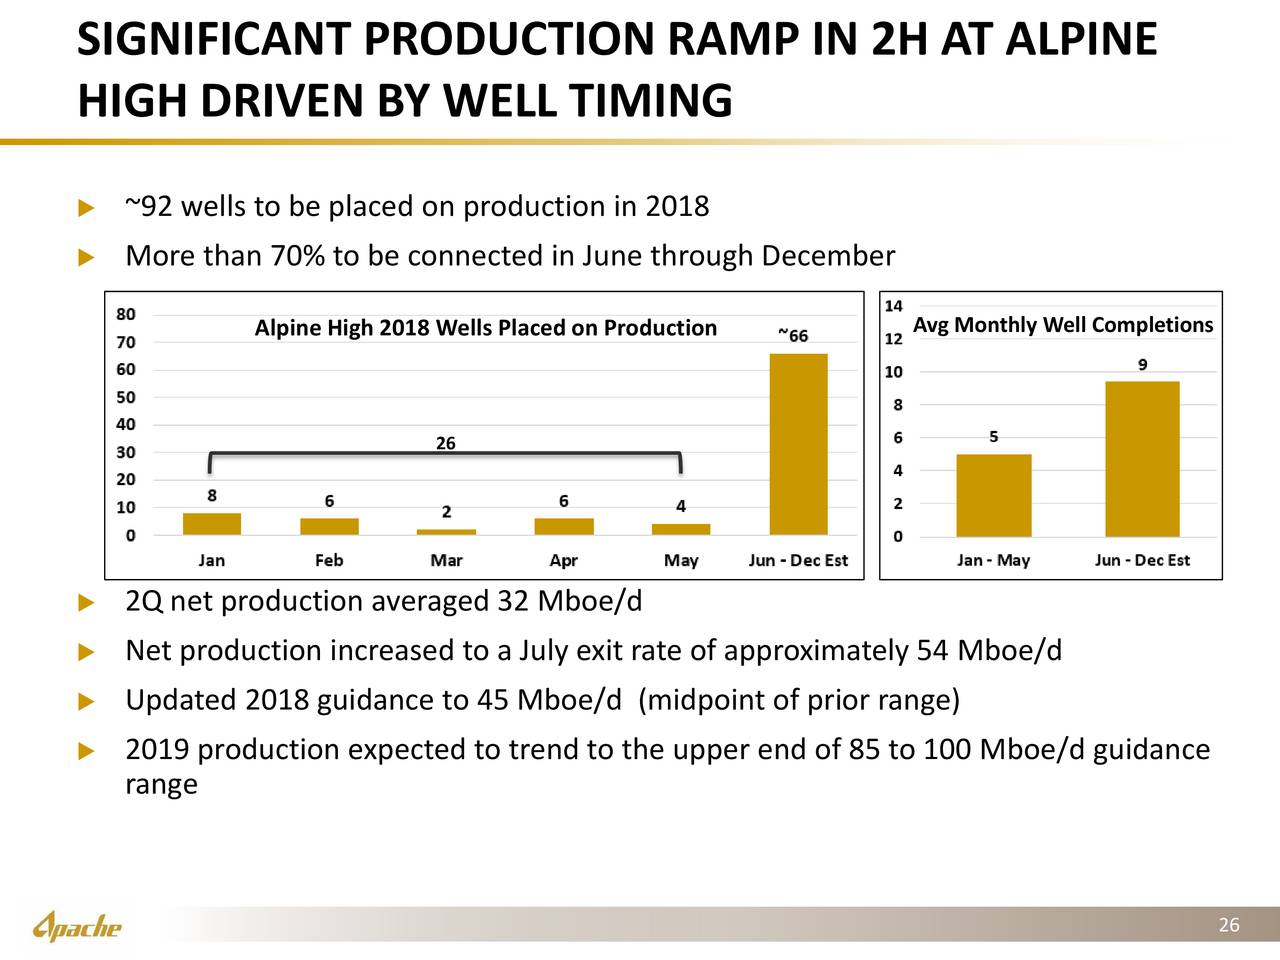 SIGNIFICANT PRODUCTION RAMP IN 2H AT ALPINE